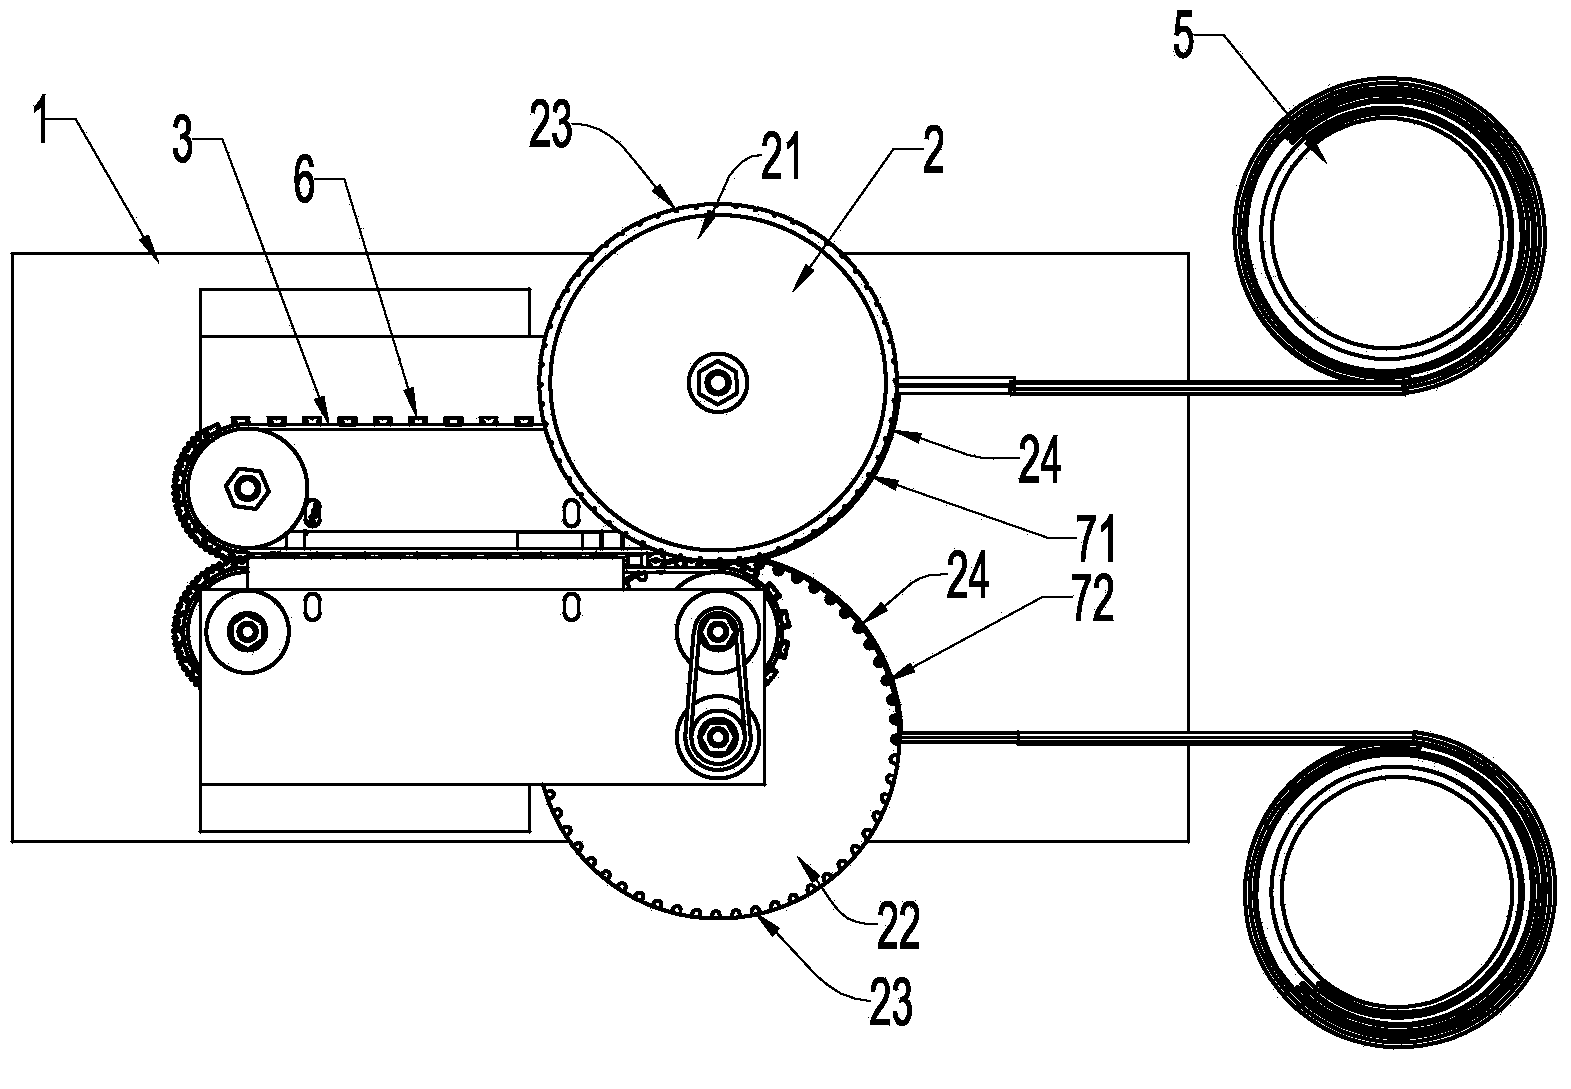 Automatic assembly device for watch winding stem assembly